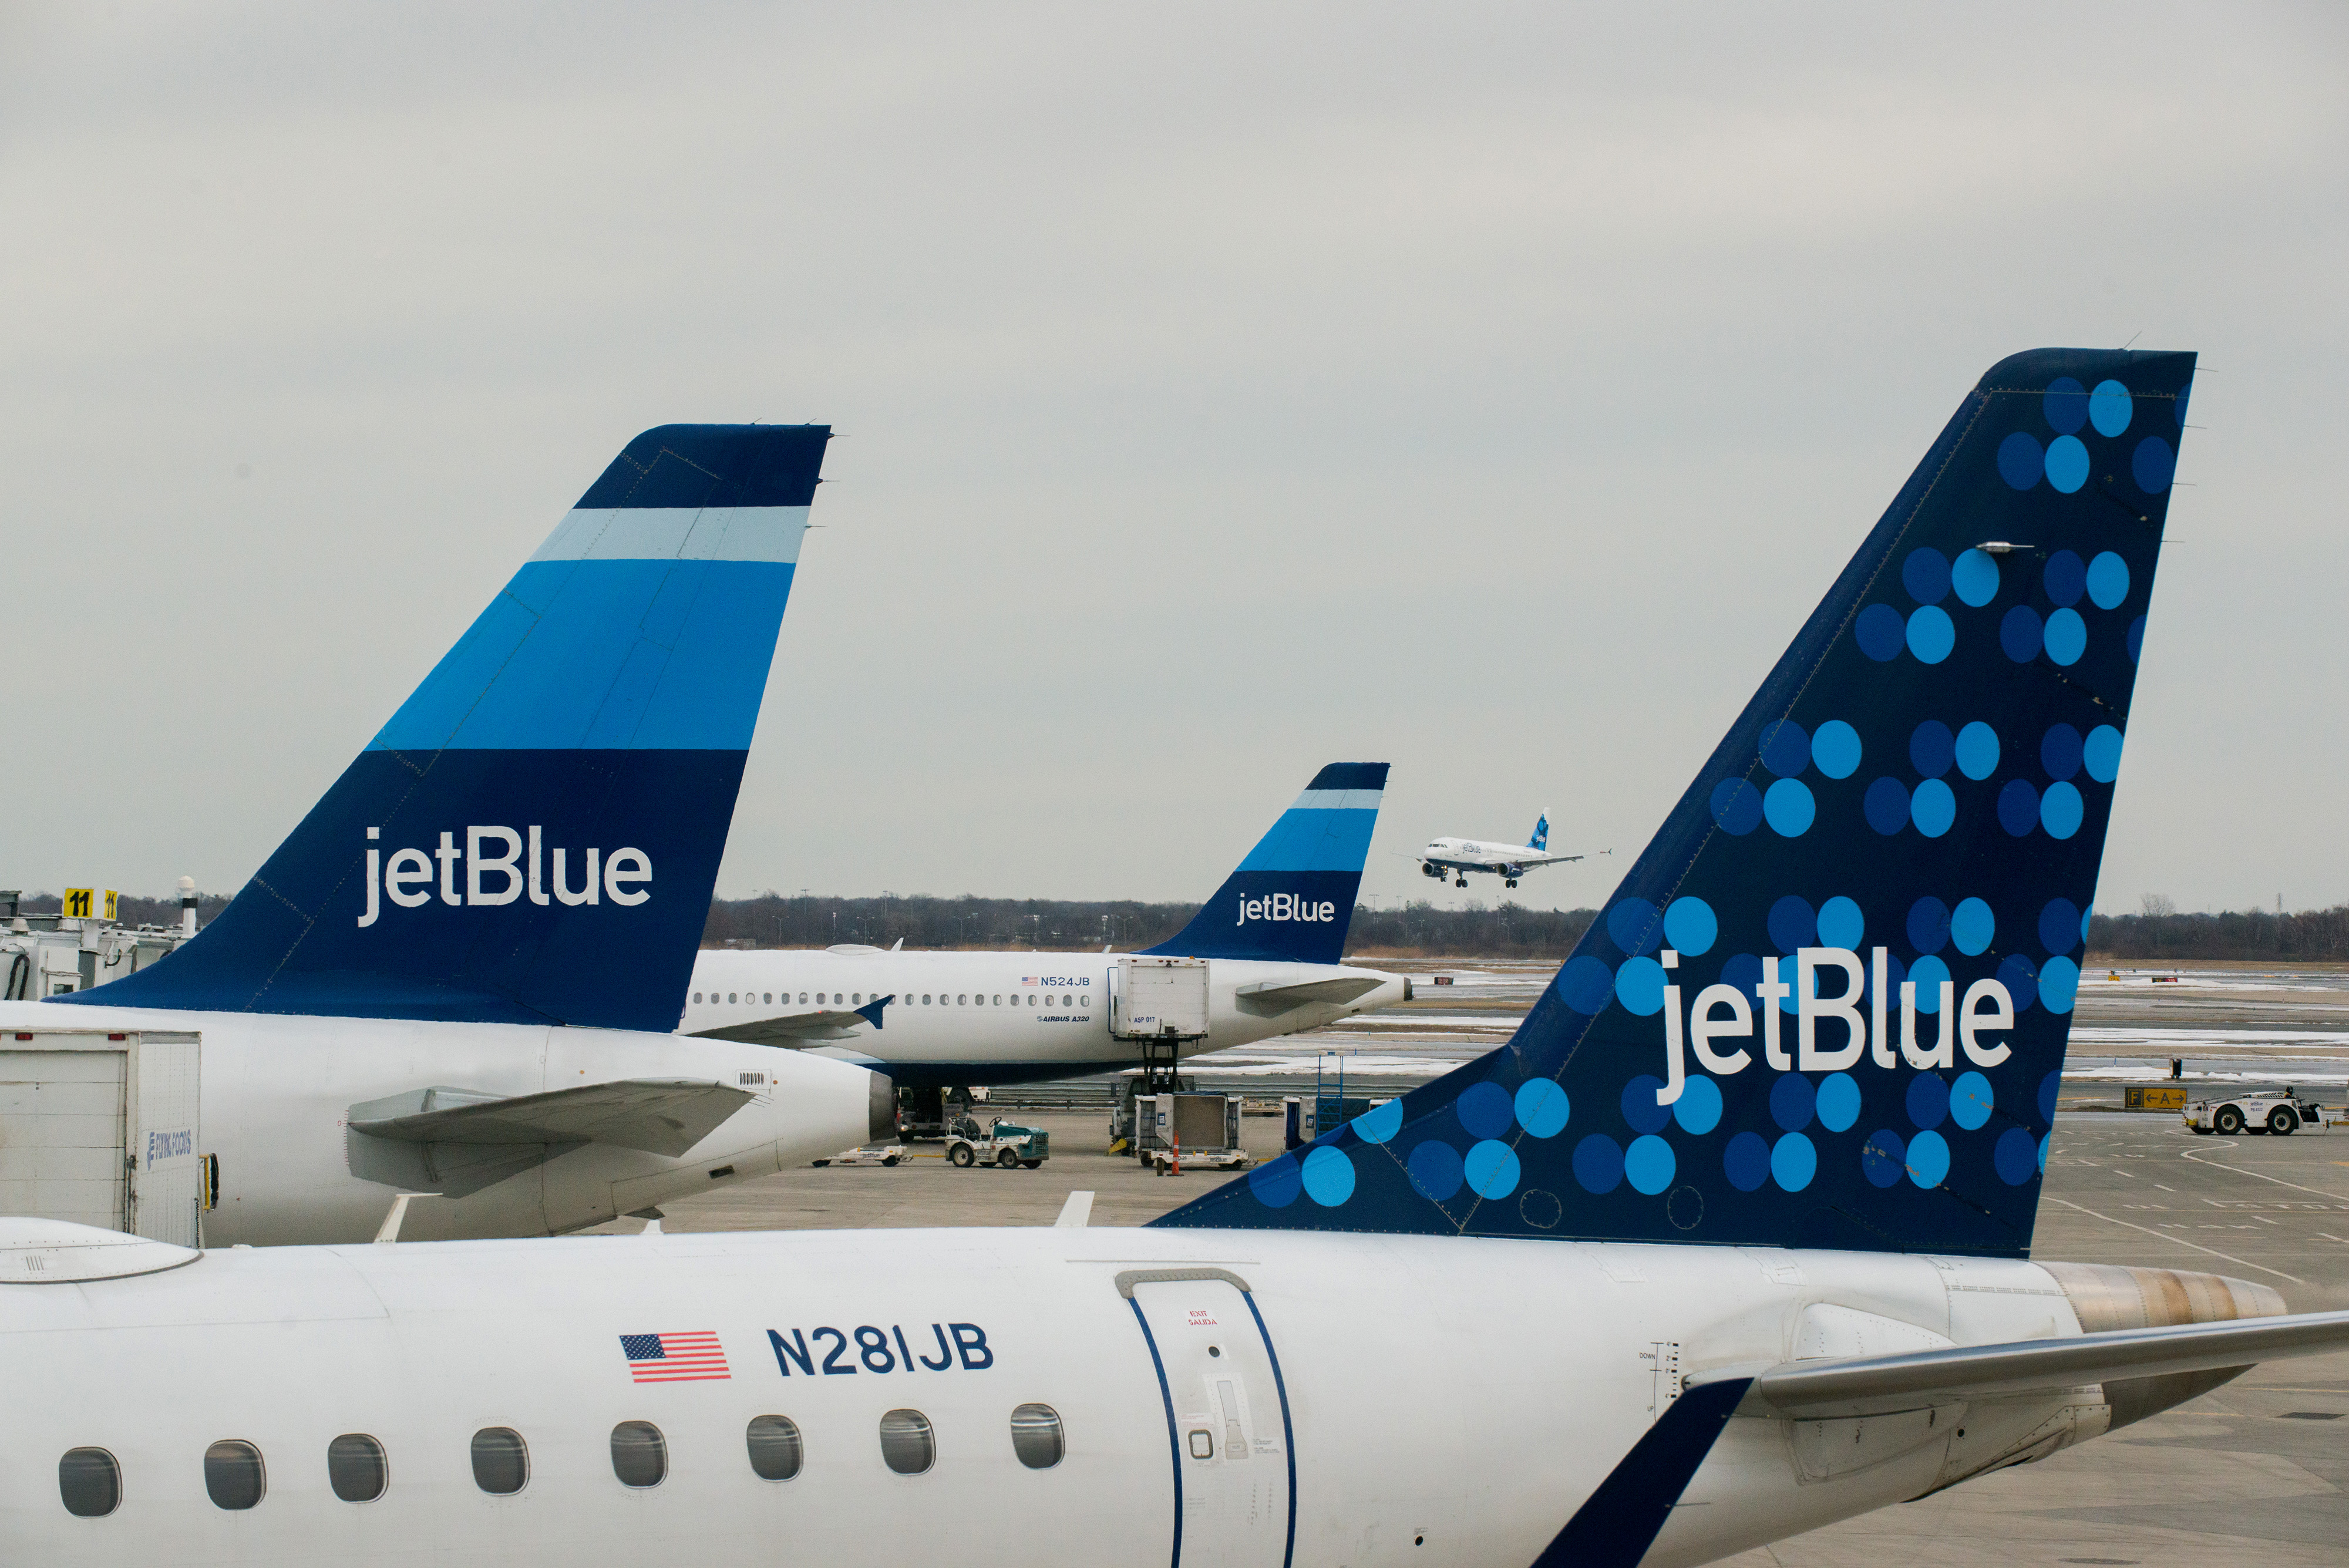 JetBlue Airways Corp. planes sit docked at the gates of Terminal 5 as another of the company's jets lands at John F. Kennedy International Airport in New York on Jan. 28, 2014.